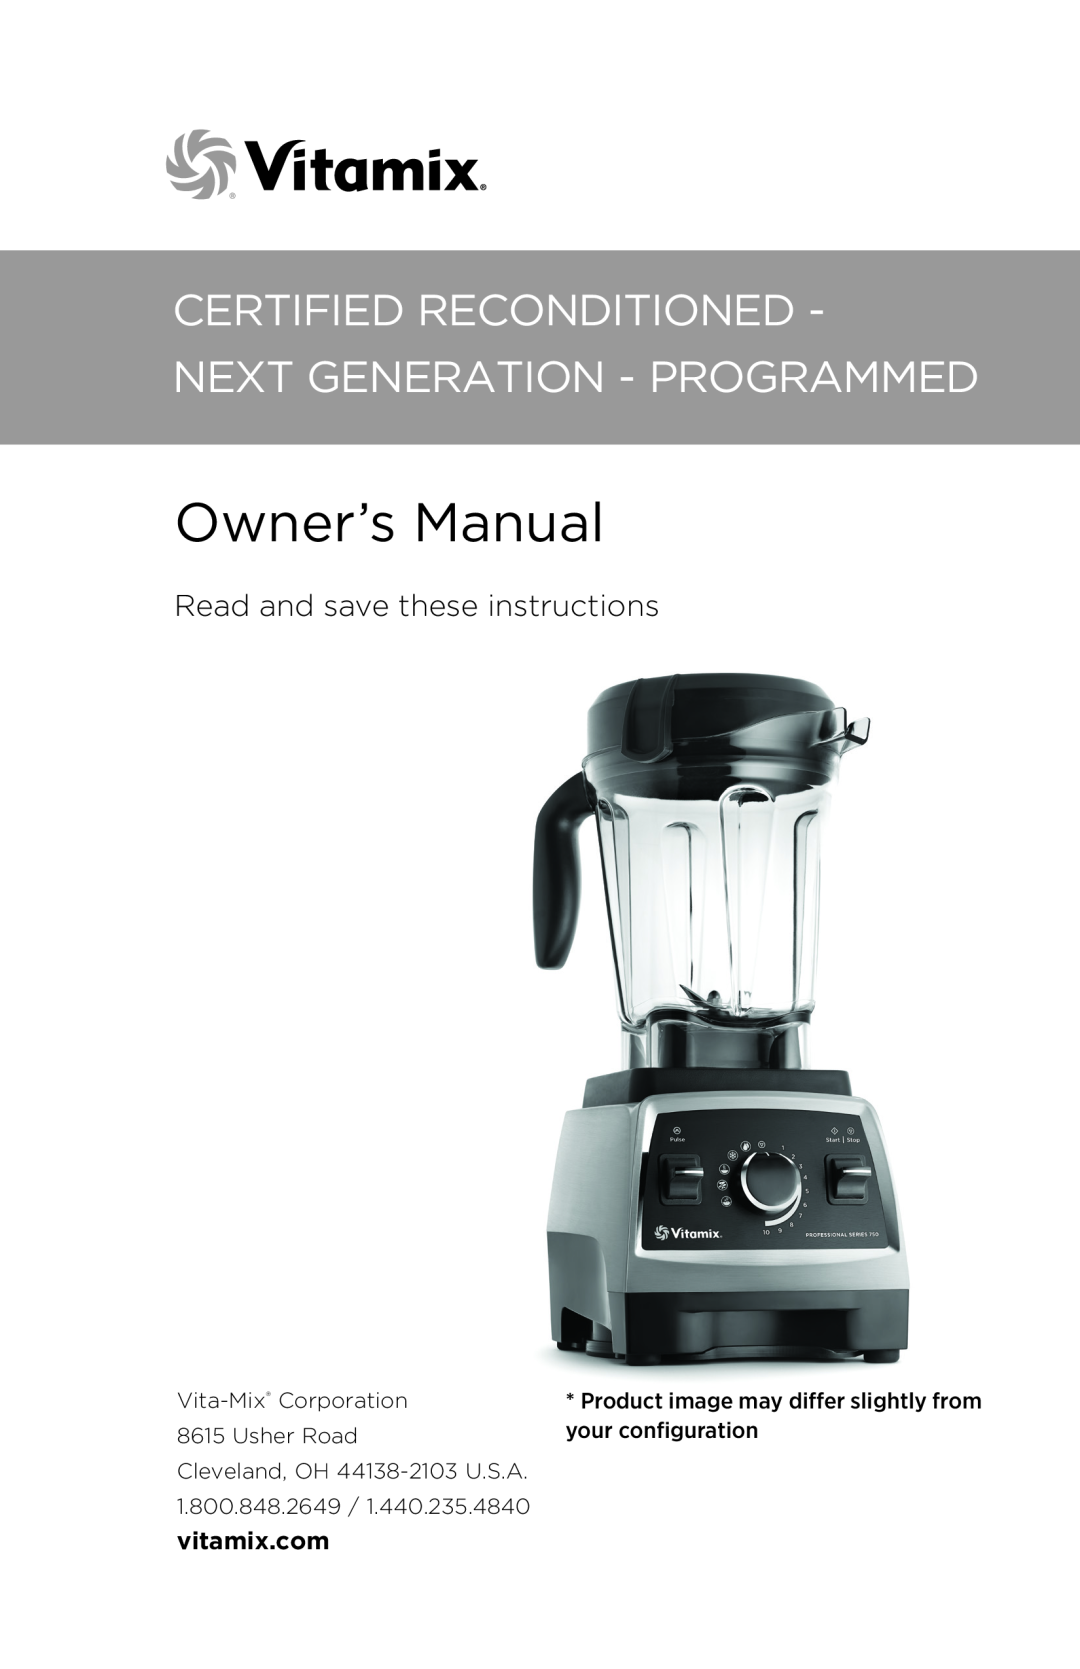 Vita-Mix NA owner manual Certified Reconditioned Next Generation - Programmed, vitamix.com, Owner’s Manual 